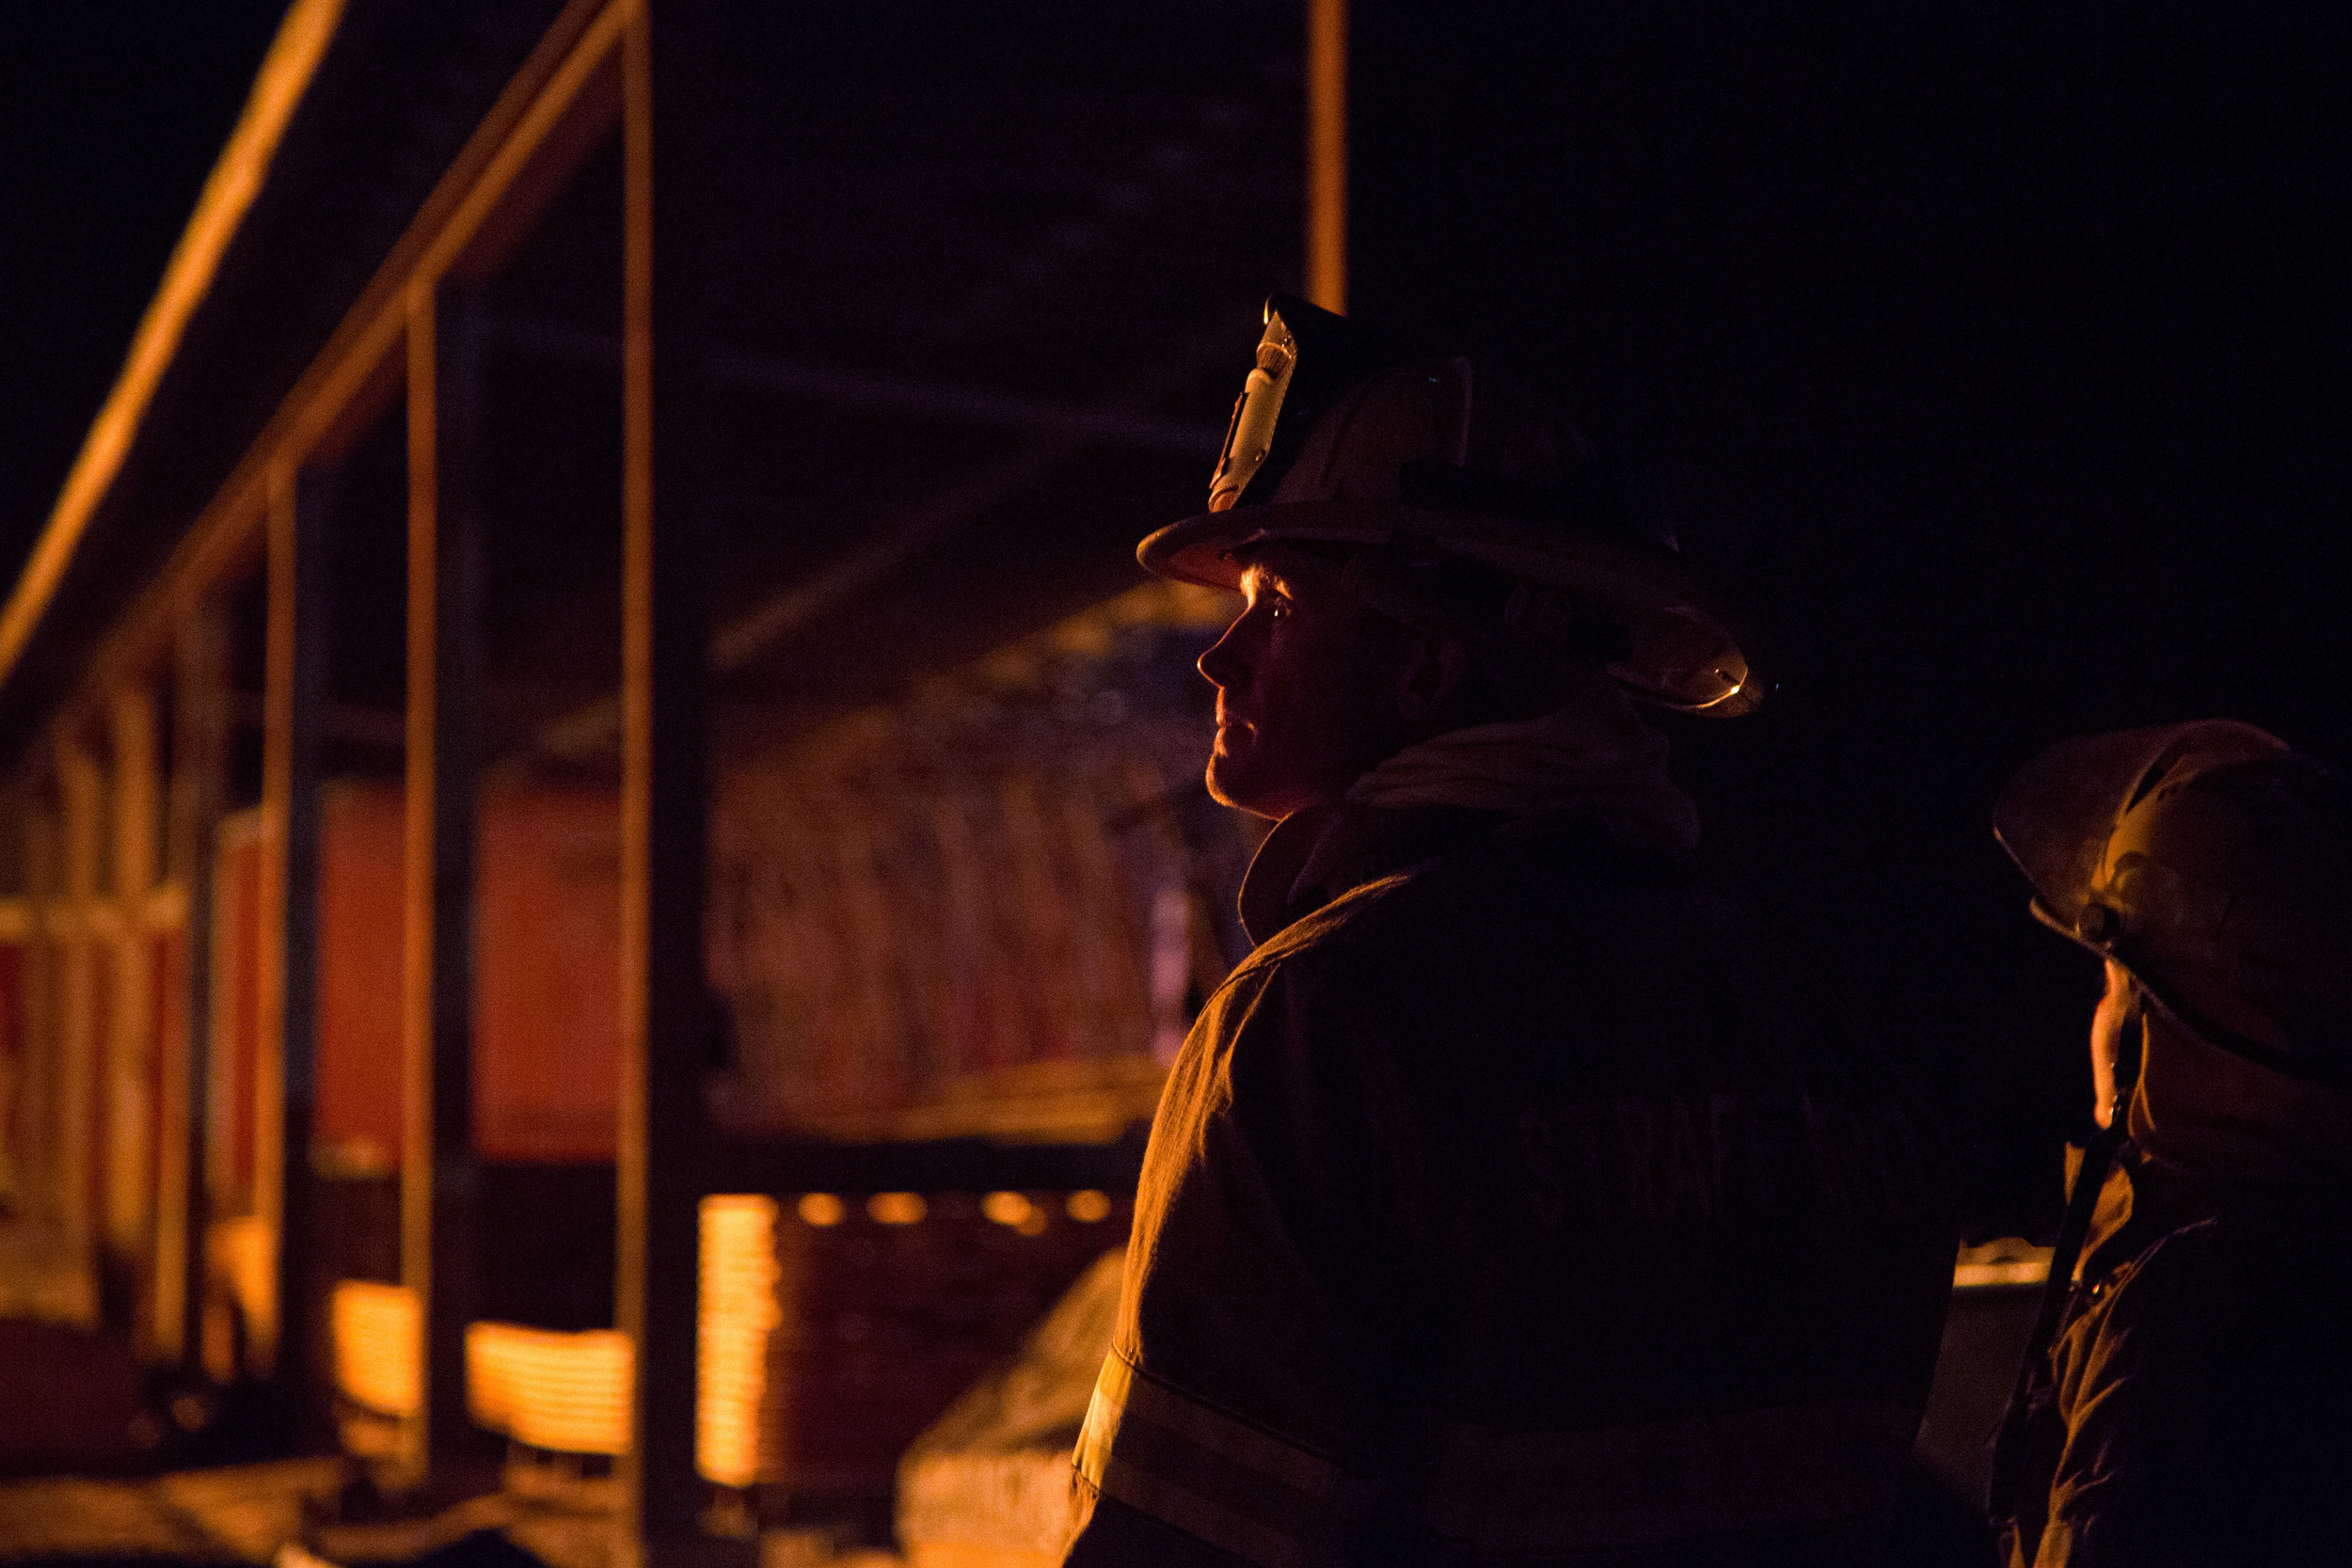  Strafford Fire Chief Jeremiah Linehan watches as firefighters from across the Upper Valley work to extinguish the four-alarm fire that leveled the sawmill building at Britton Lumber Company on Saturday, March 28, 2015. 